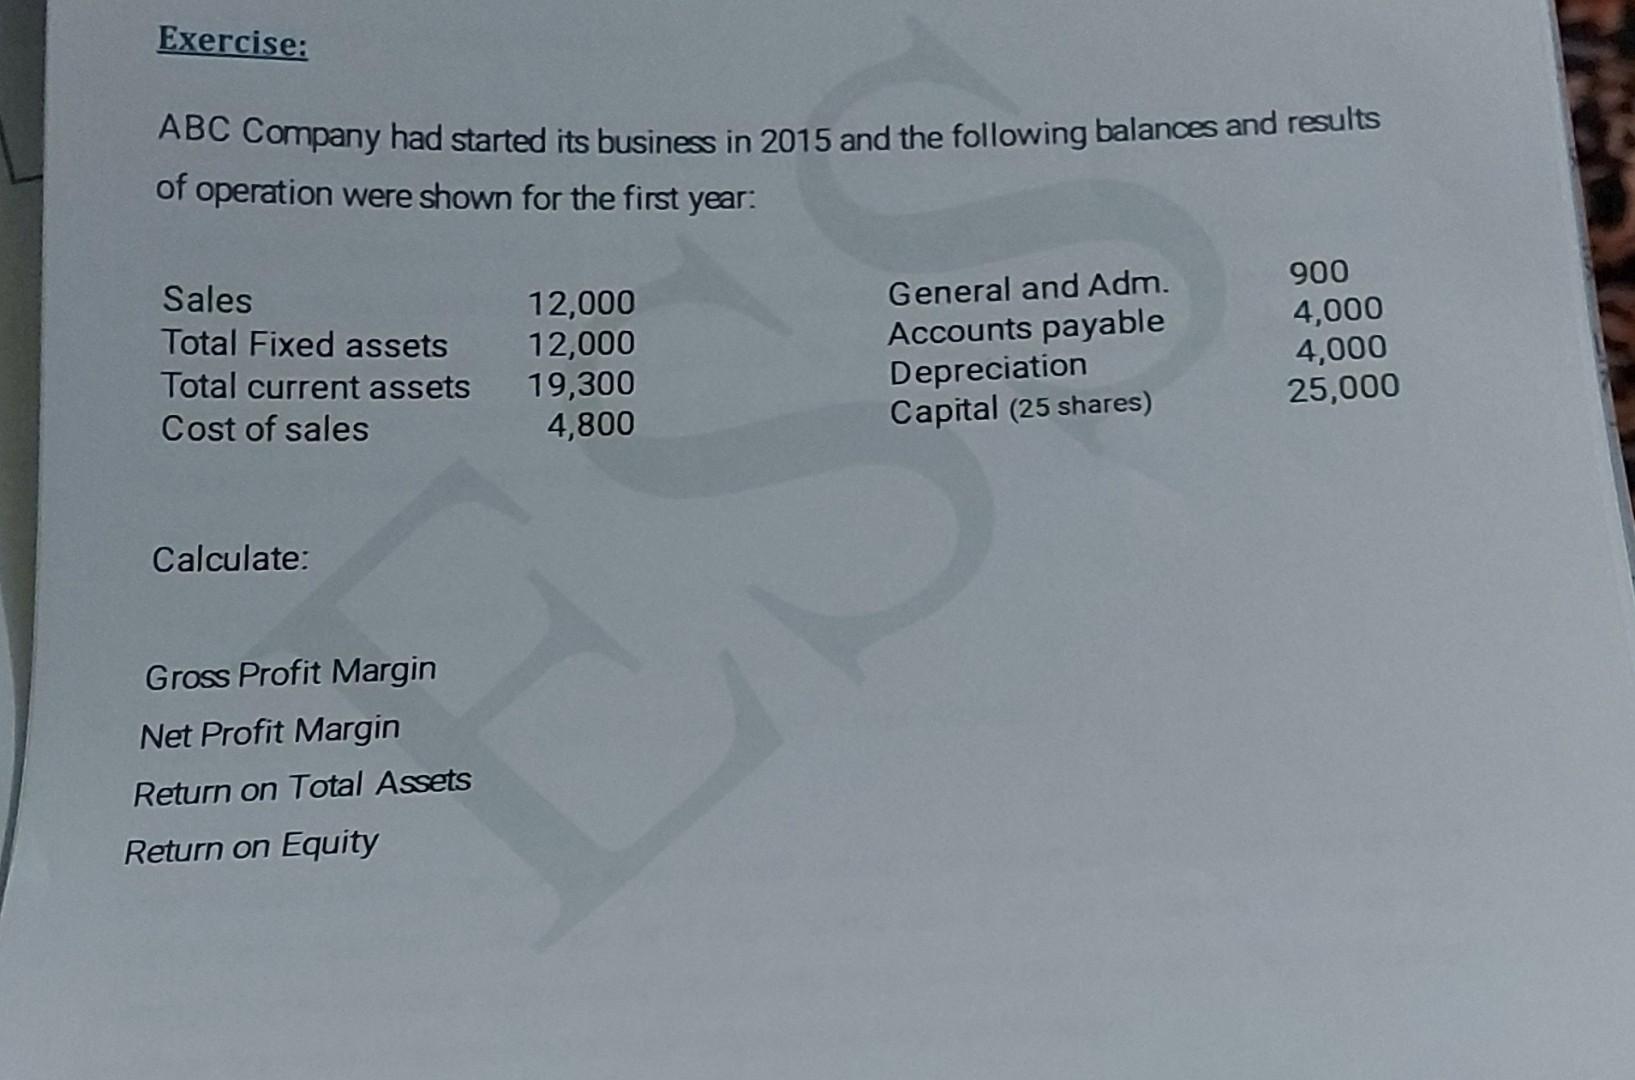 Exercise: ABC Company had started its business in 2015 and the following balances and results of operation